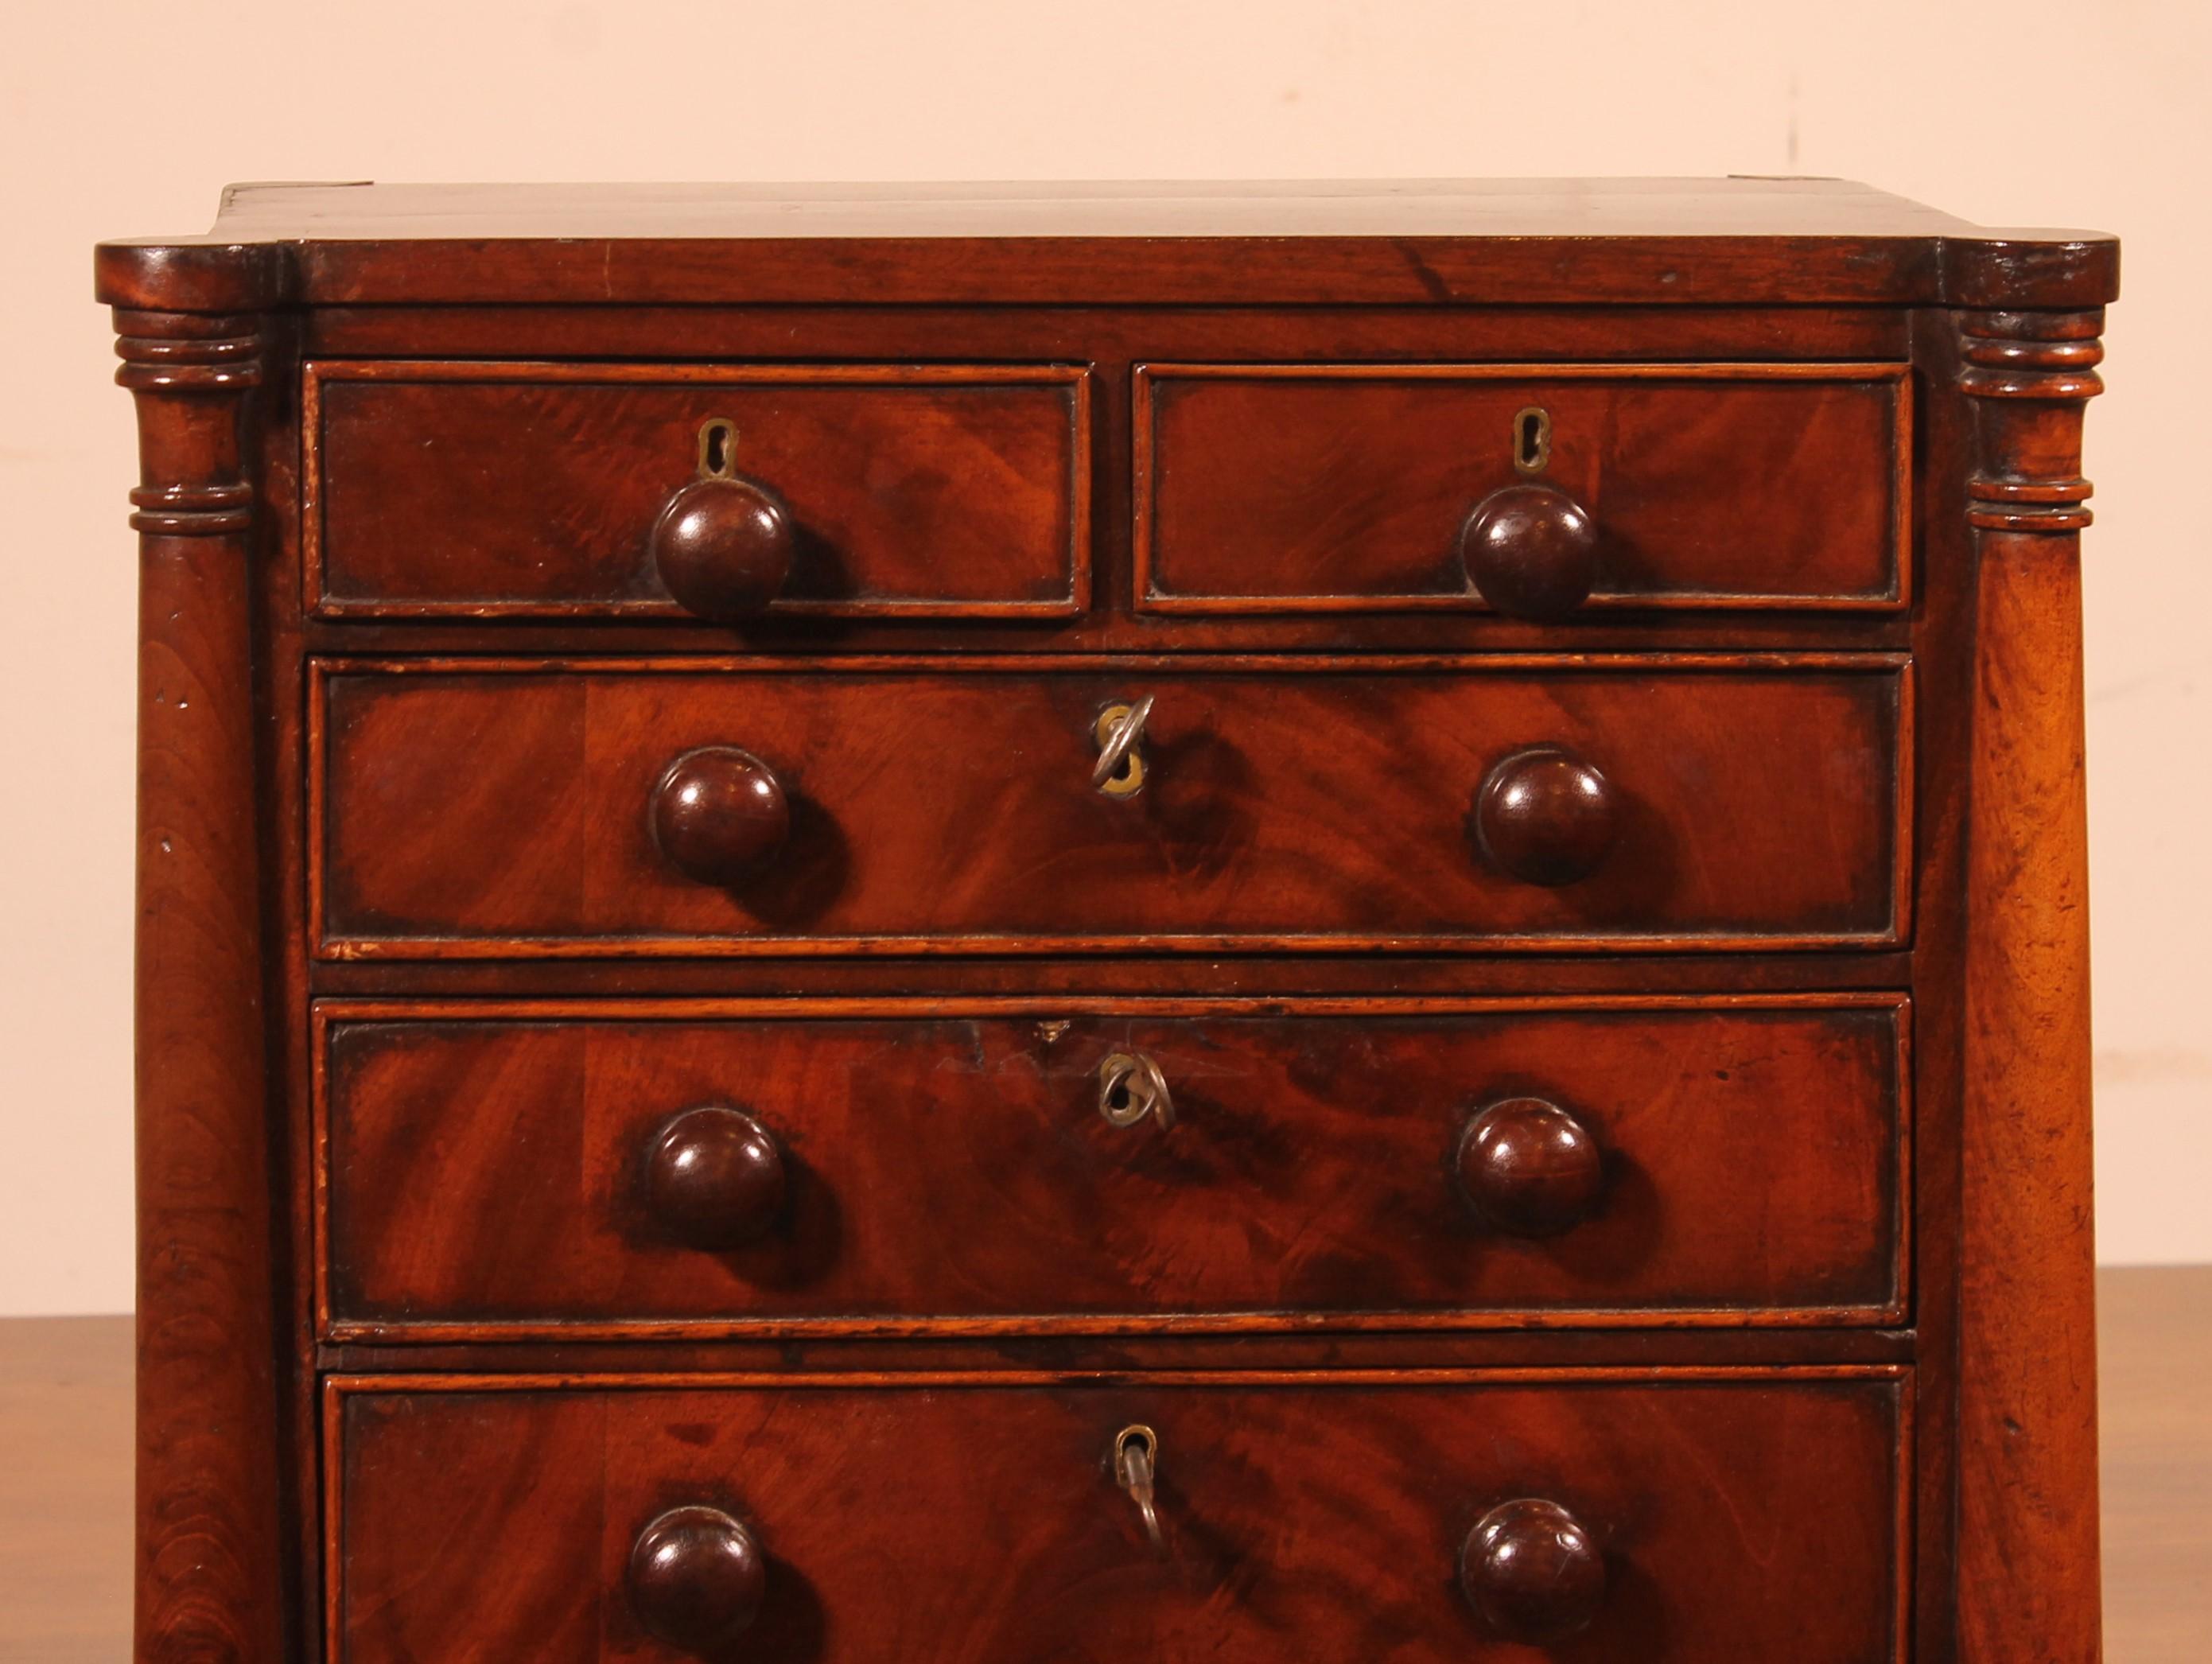 lovely miniature chest of drawers from the 19th century composed of 5 drawers
Very nice work.
The commode has its 3 keys that work
In very good condition and superb patina

interior of the drawers in oak which is a sign of qualit
y Note: two